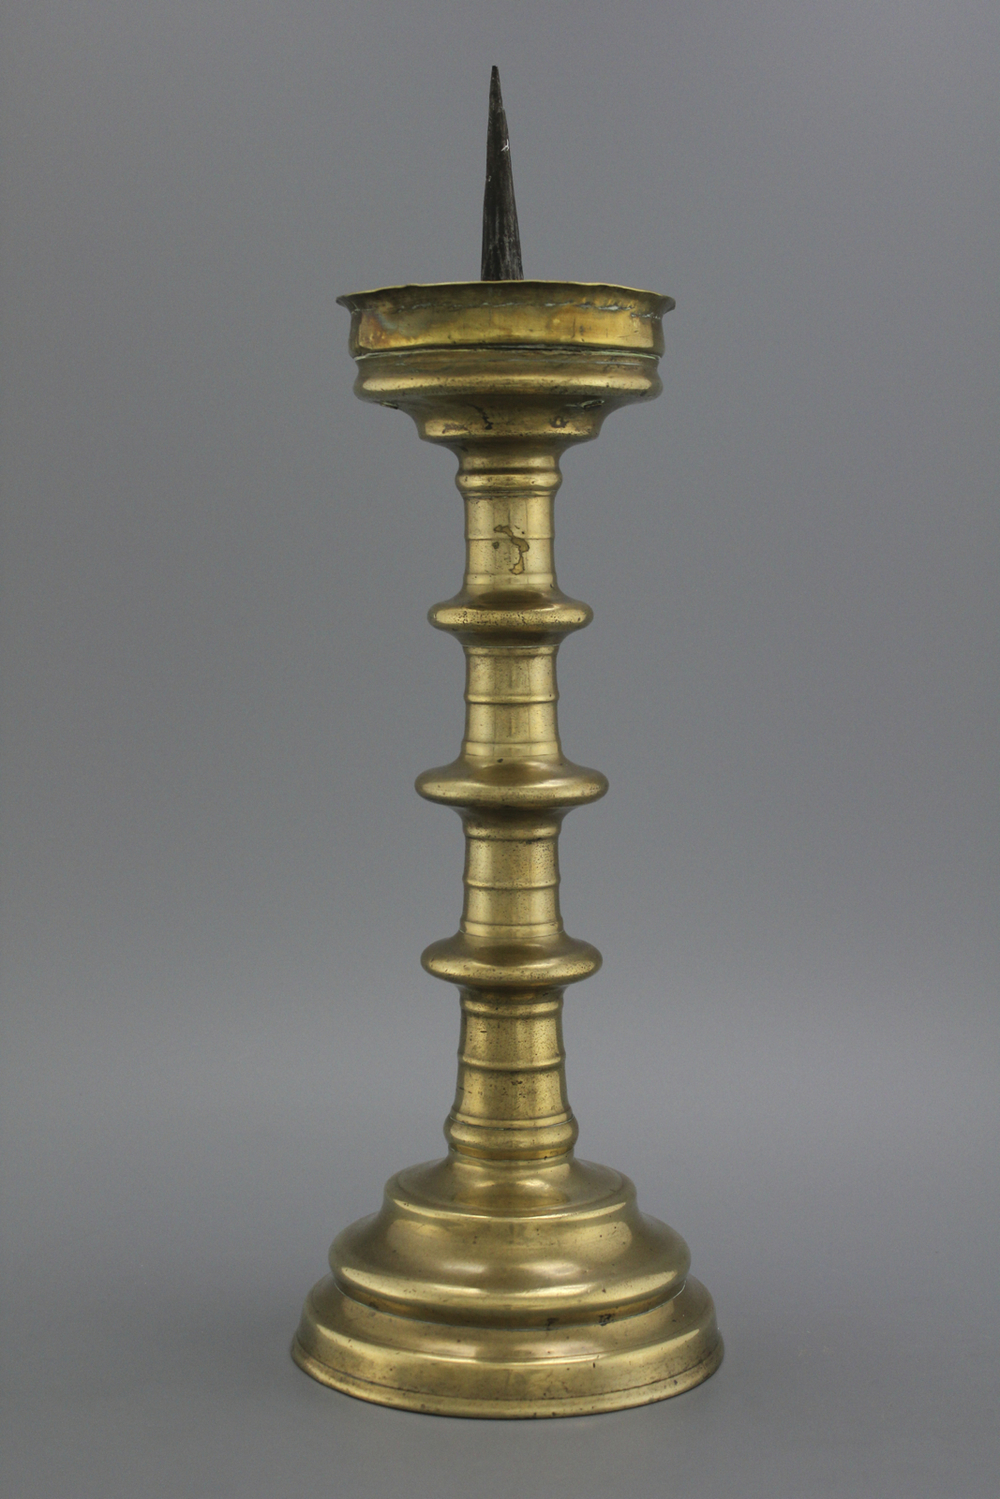 A large brass pricket candlestick, 16th C.